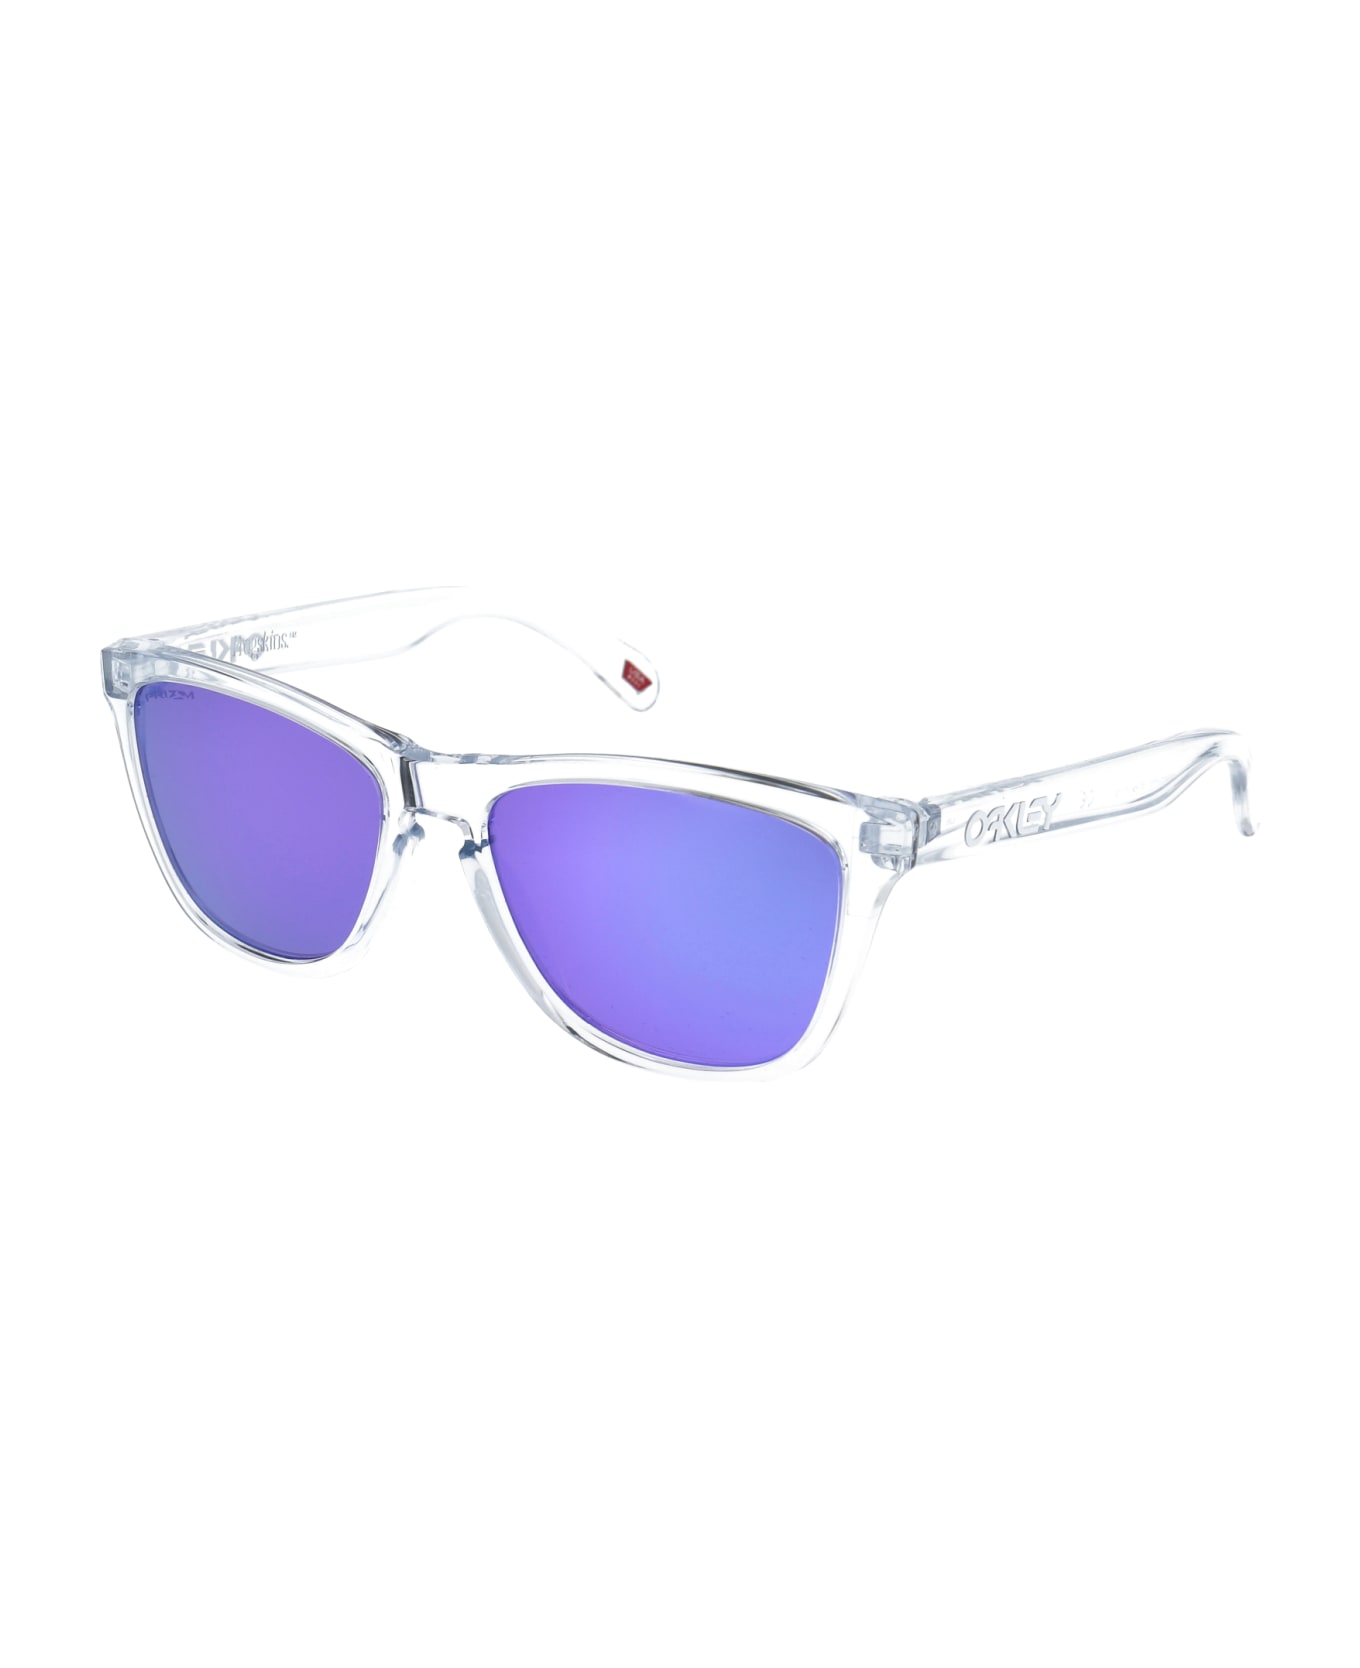 Oakley Frogskins Sunglasses - 9013H7 POLISHED CLEAR